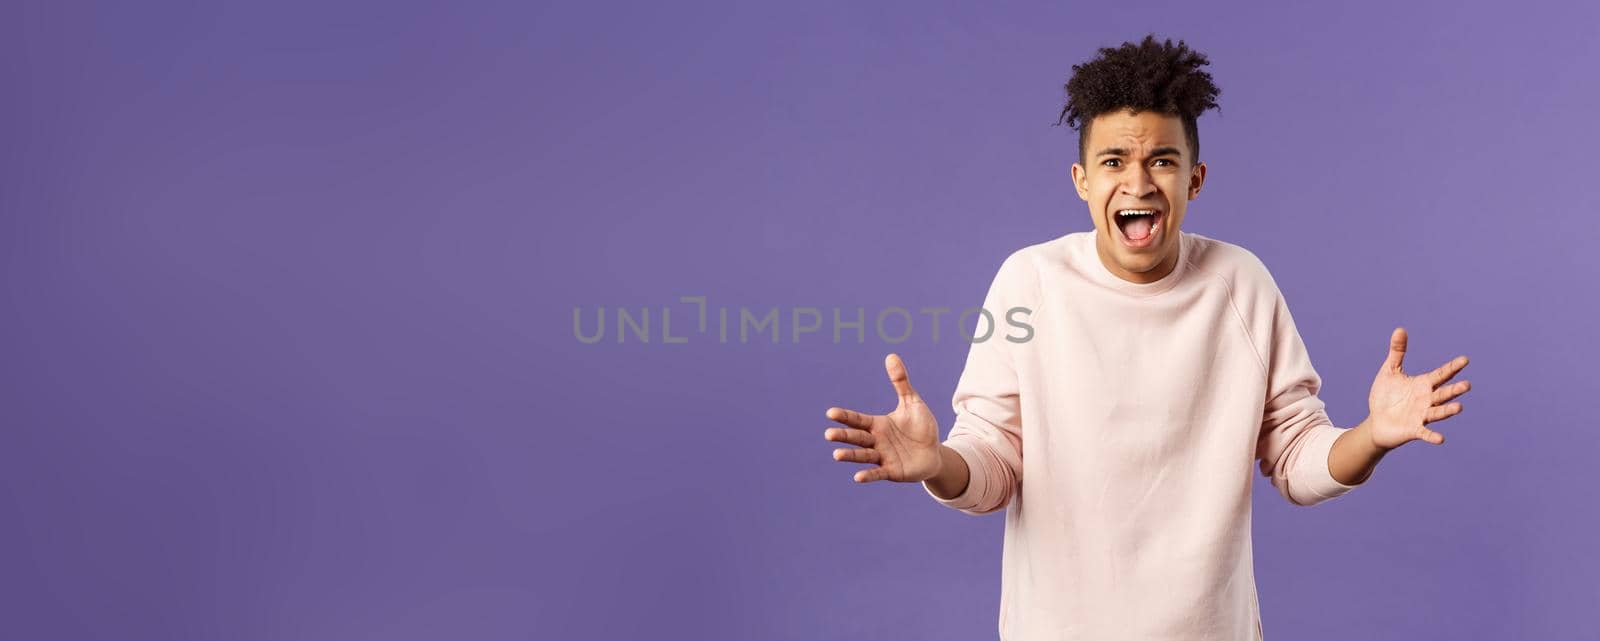 Portrait of concerned, upset and frustrated young man cant believe he lost, asking why, spread hands sideways in dismay, complaining shouting angry and uneasy, standing purple background by Benzoix